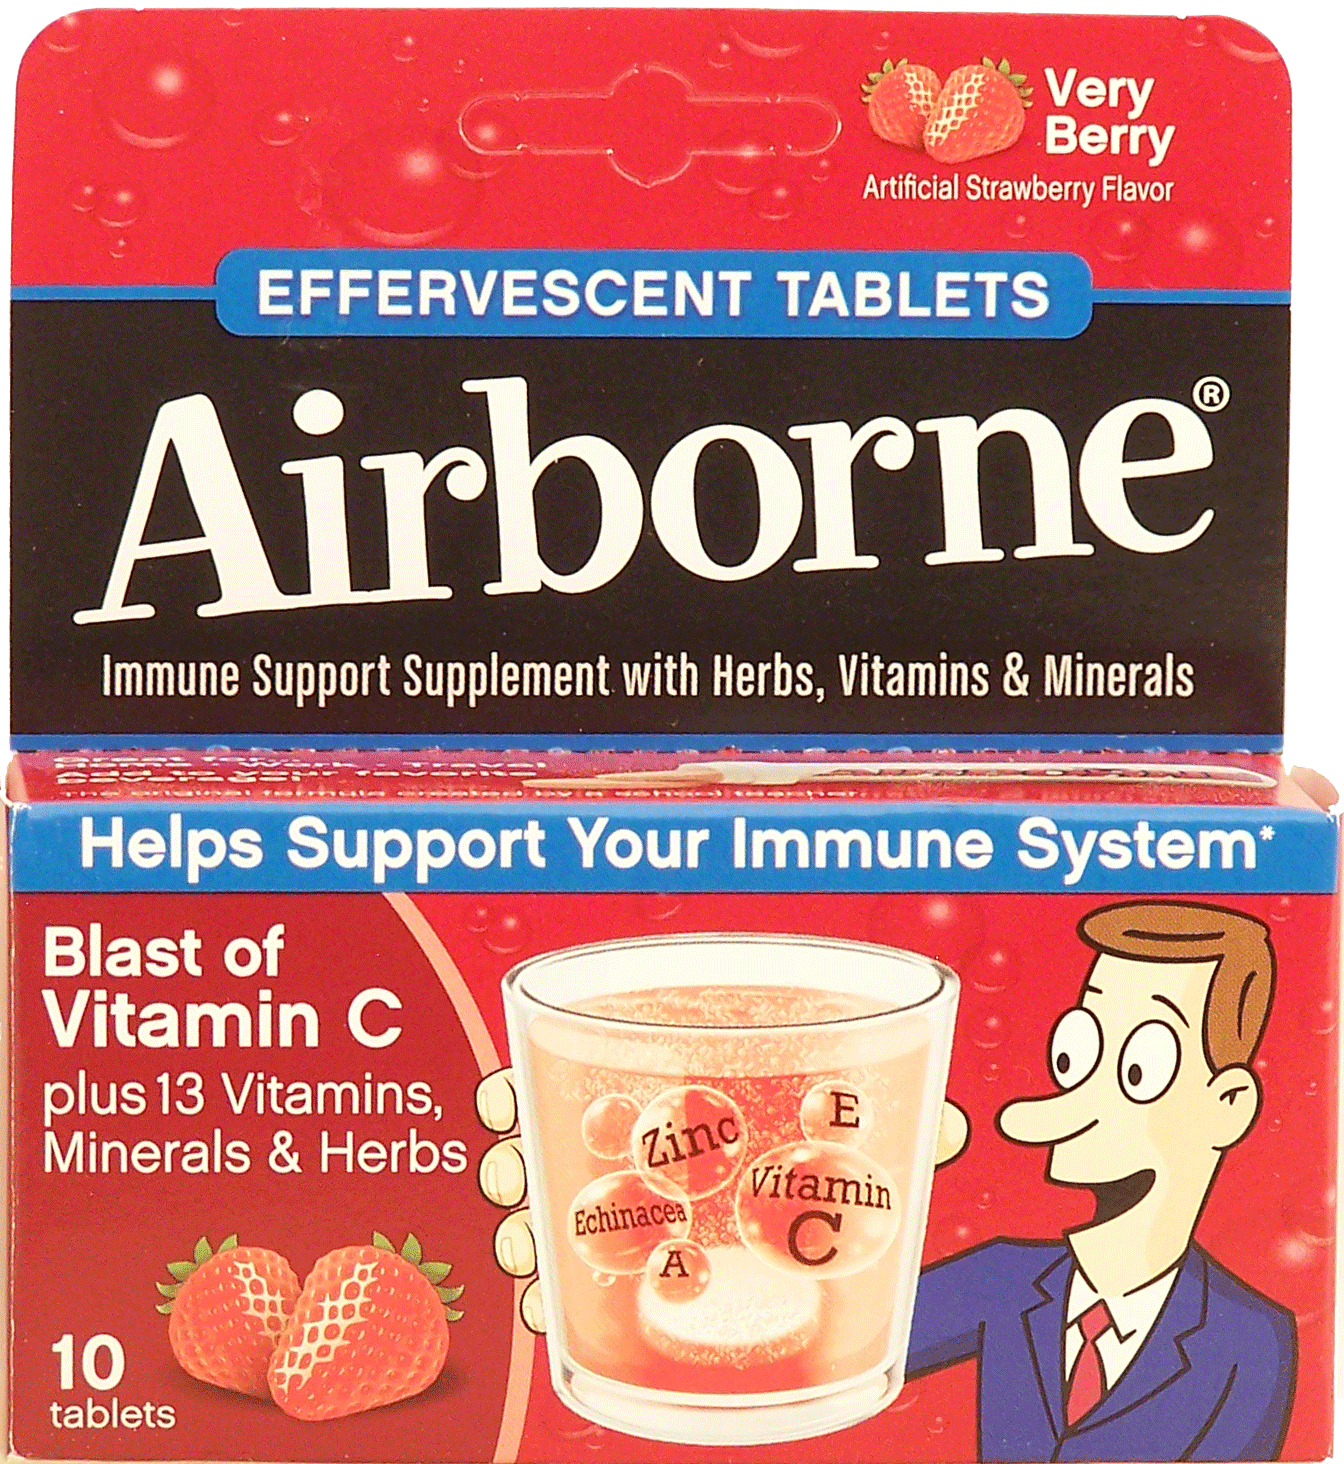 Airborne  immune support supplement with herbs, vitamins & minerals, very berry flavor effervescent tablets Full-Size Picture